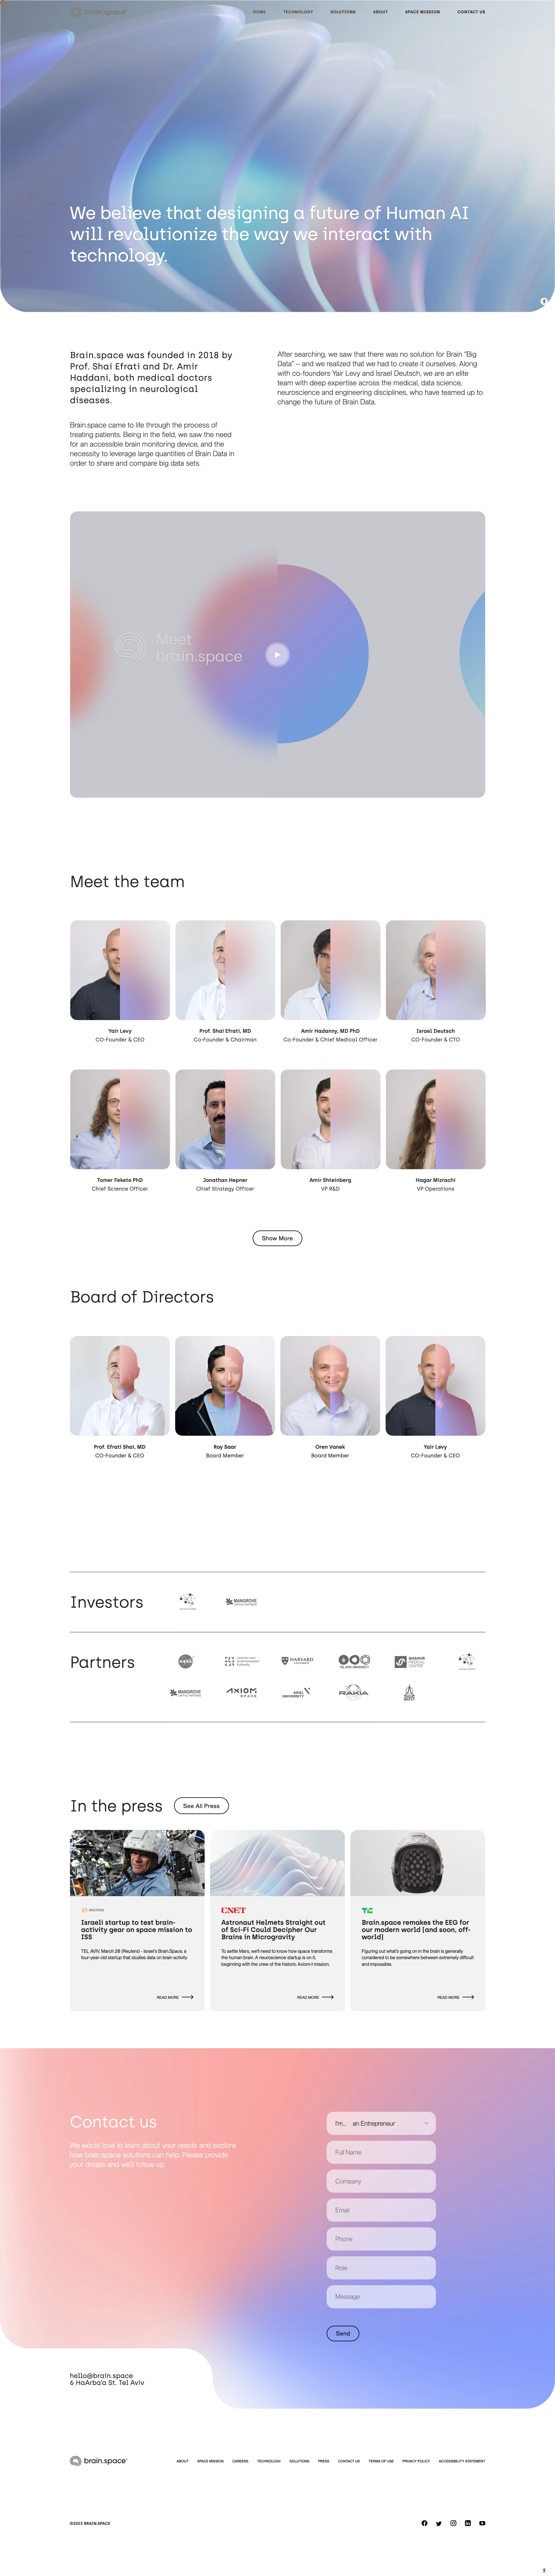 brain.space Landing Page Example: The brain data company. We believe that designing a future of Human AI will revolutionize the way we interact with technology.